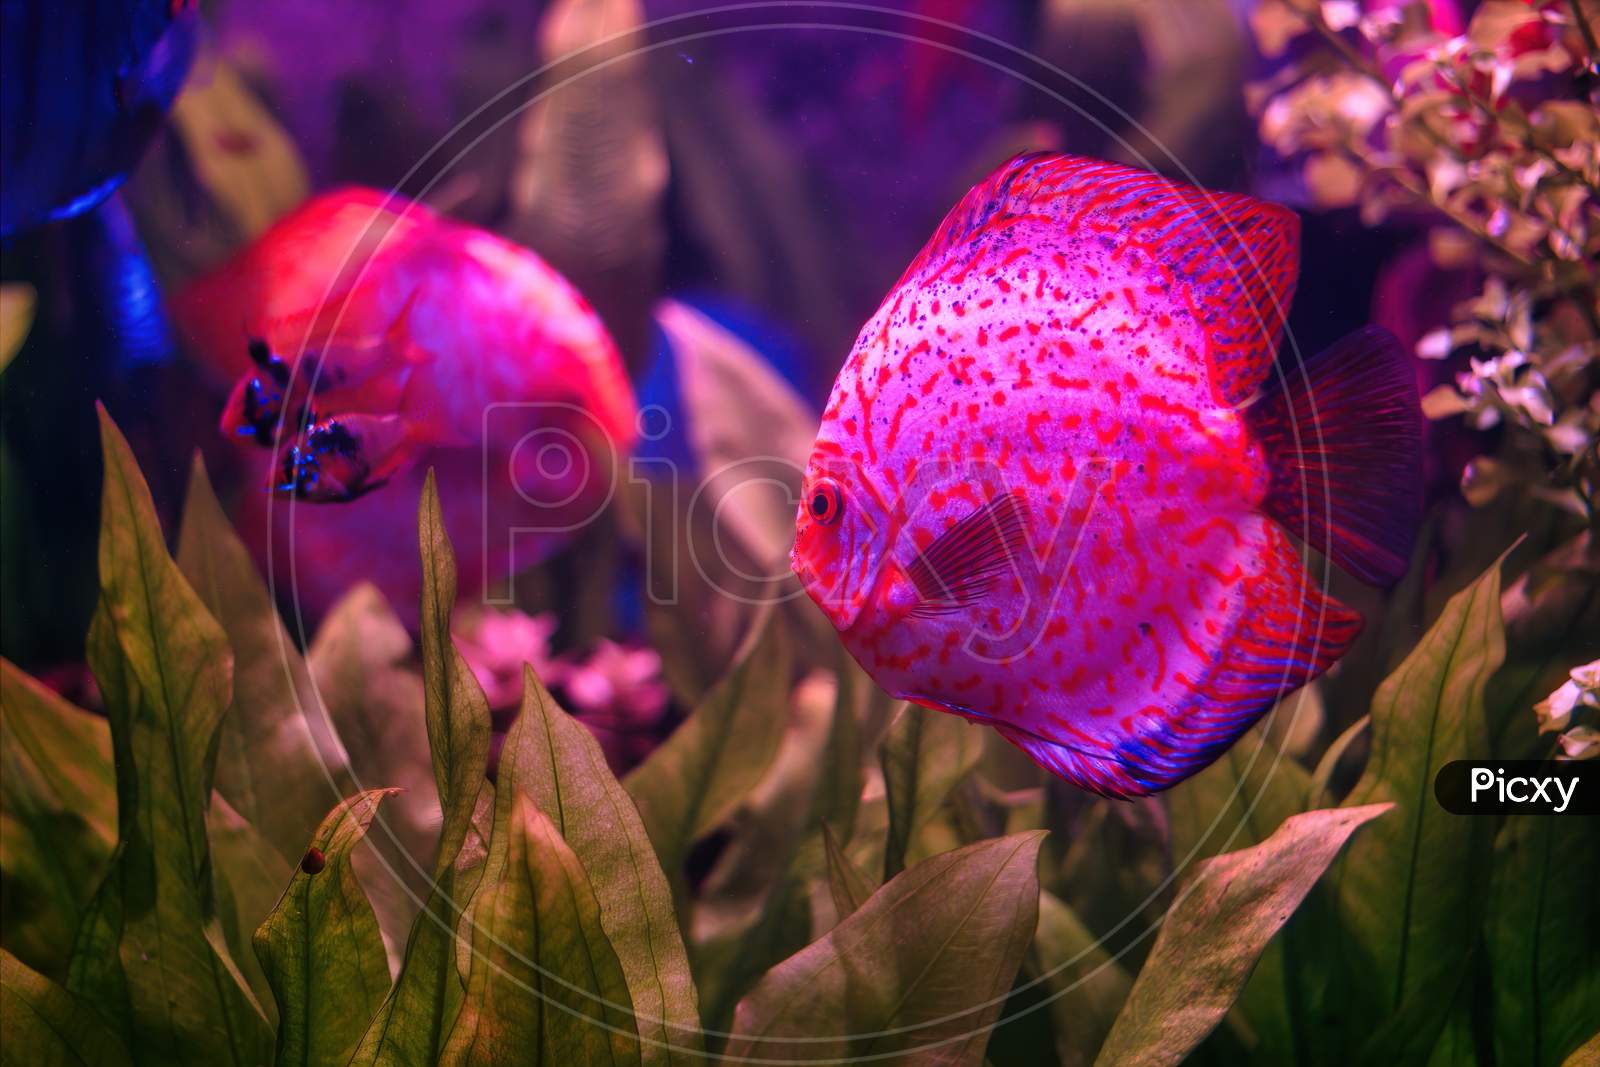 Symphysodon Discus, The Red Discus Or Heckel Discus - A Species Of Cichlid Native To Amazon Basin Fish